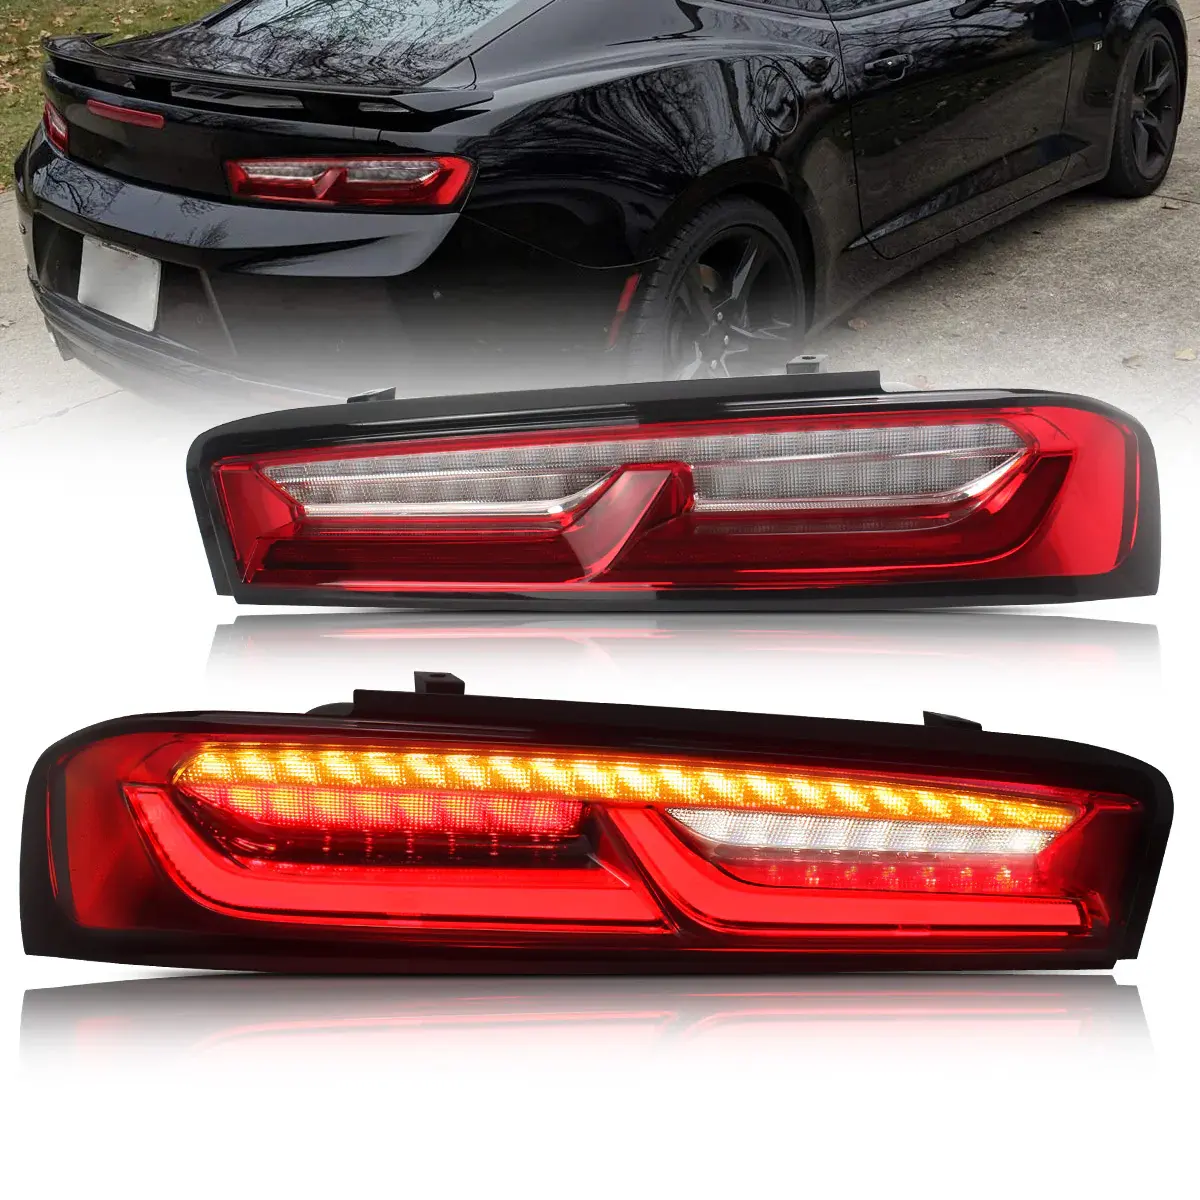 VLAND LED Taillights For Chevrolet Camaro 2016-2018 6th Gen without Reversing Lights (Fit For European Models)